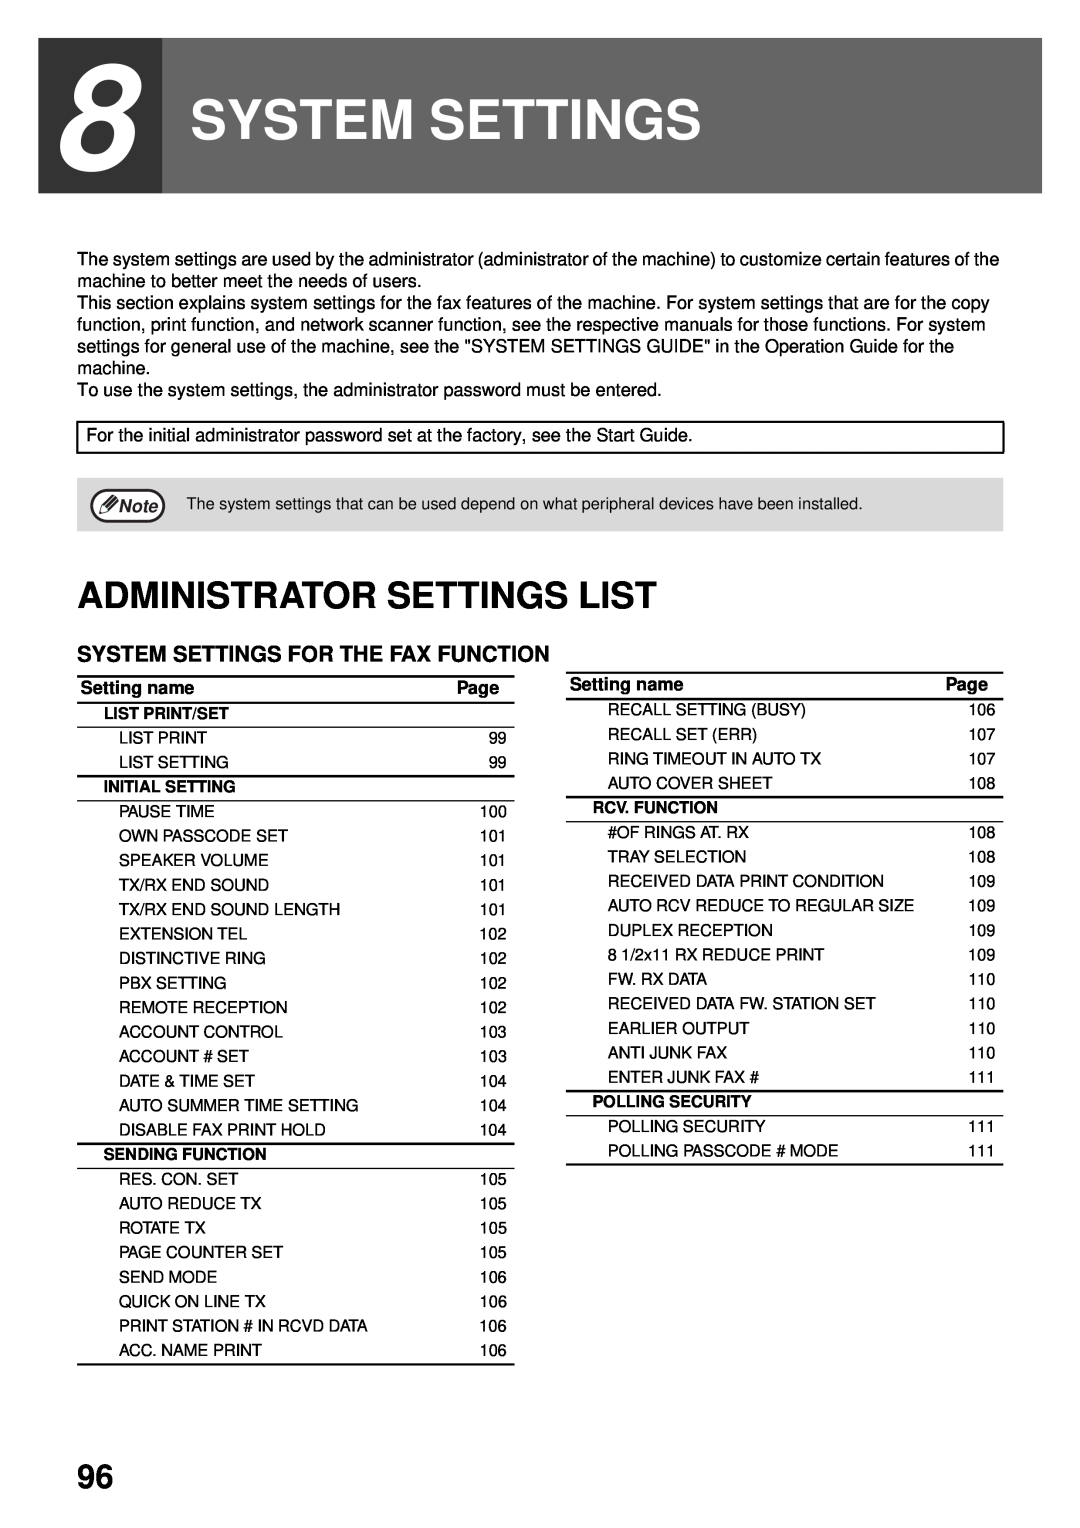 Sharp MX-FX13 appendix Administrator Settings List, System Settings For The Fax Function, Setting name, Page 